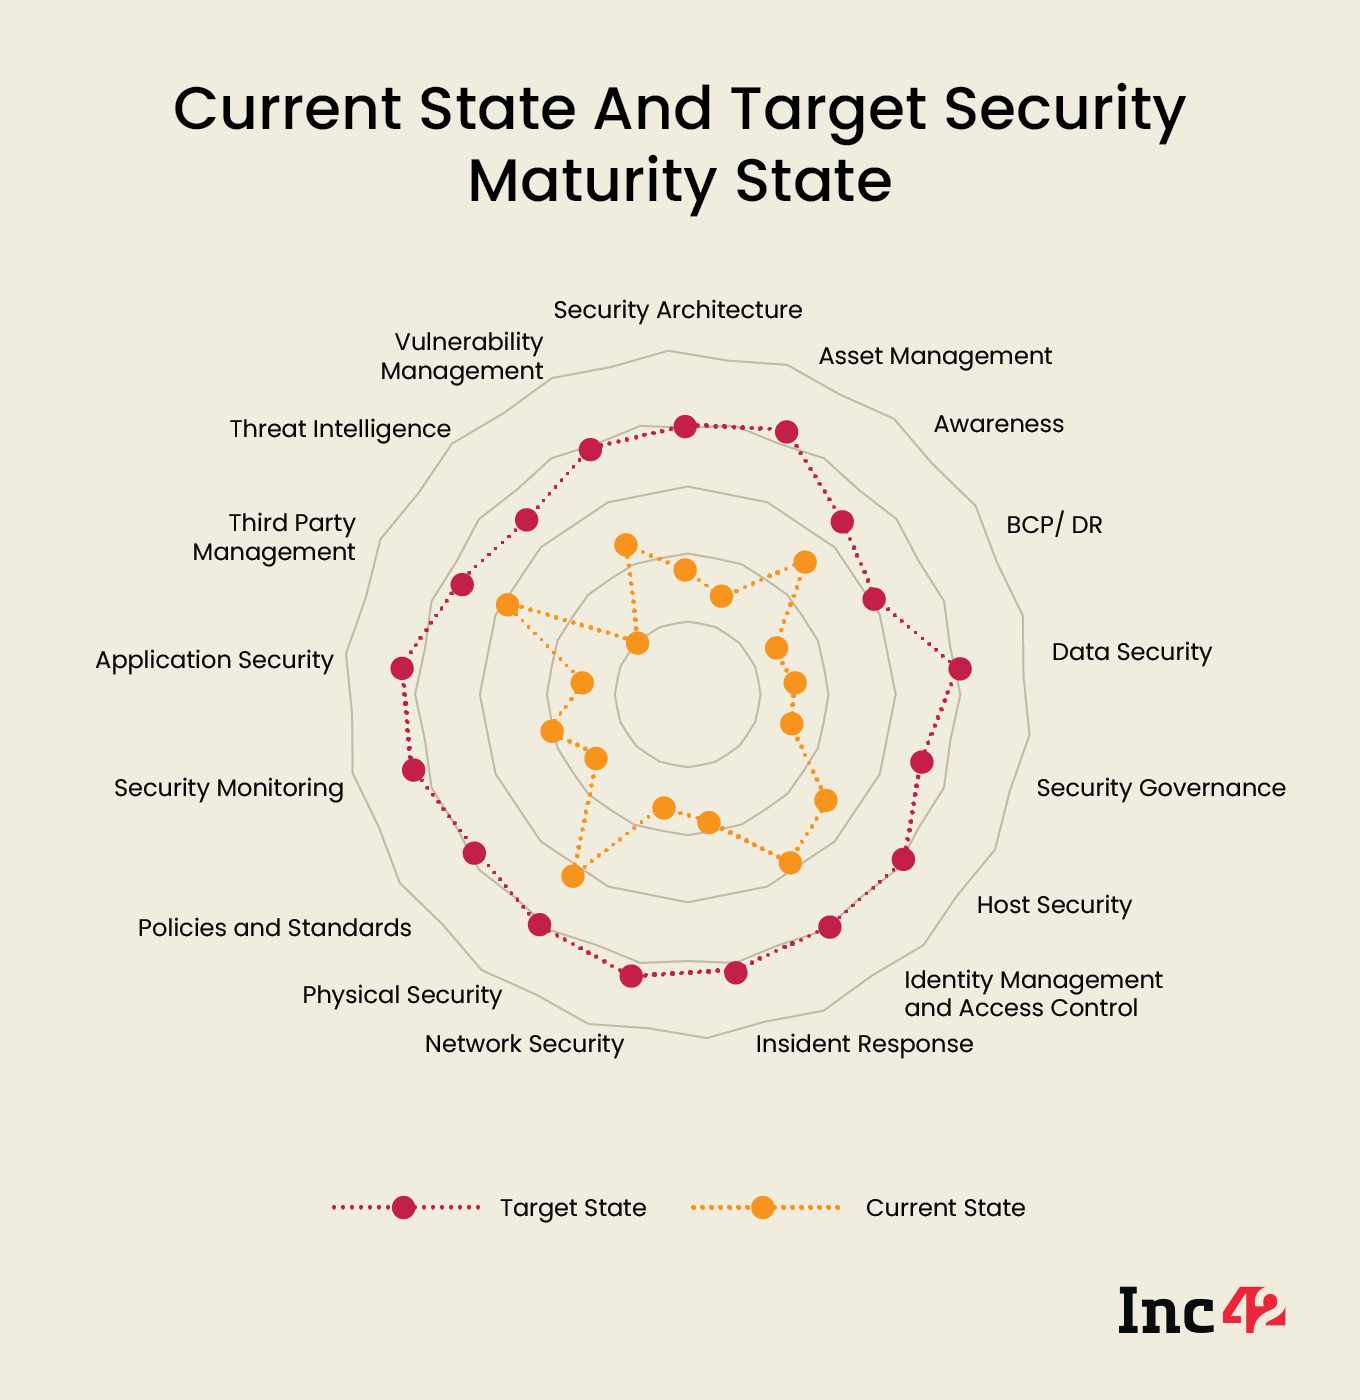 Current State And Target Security Maturity State